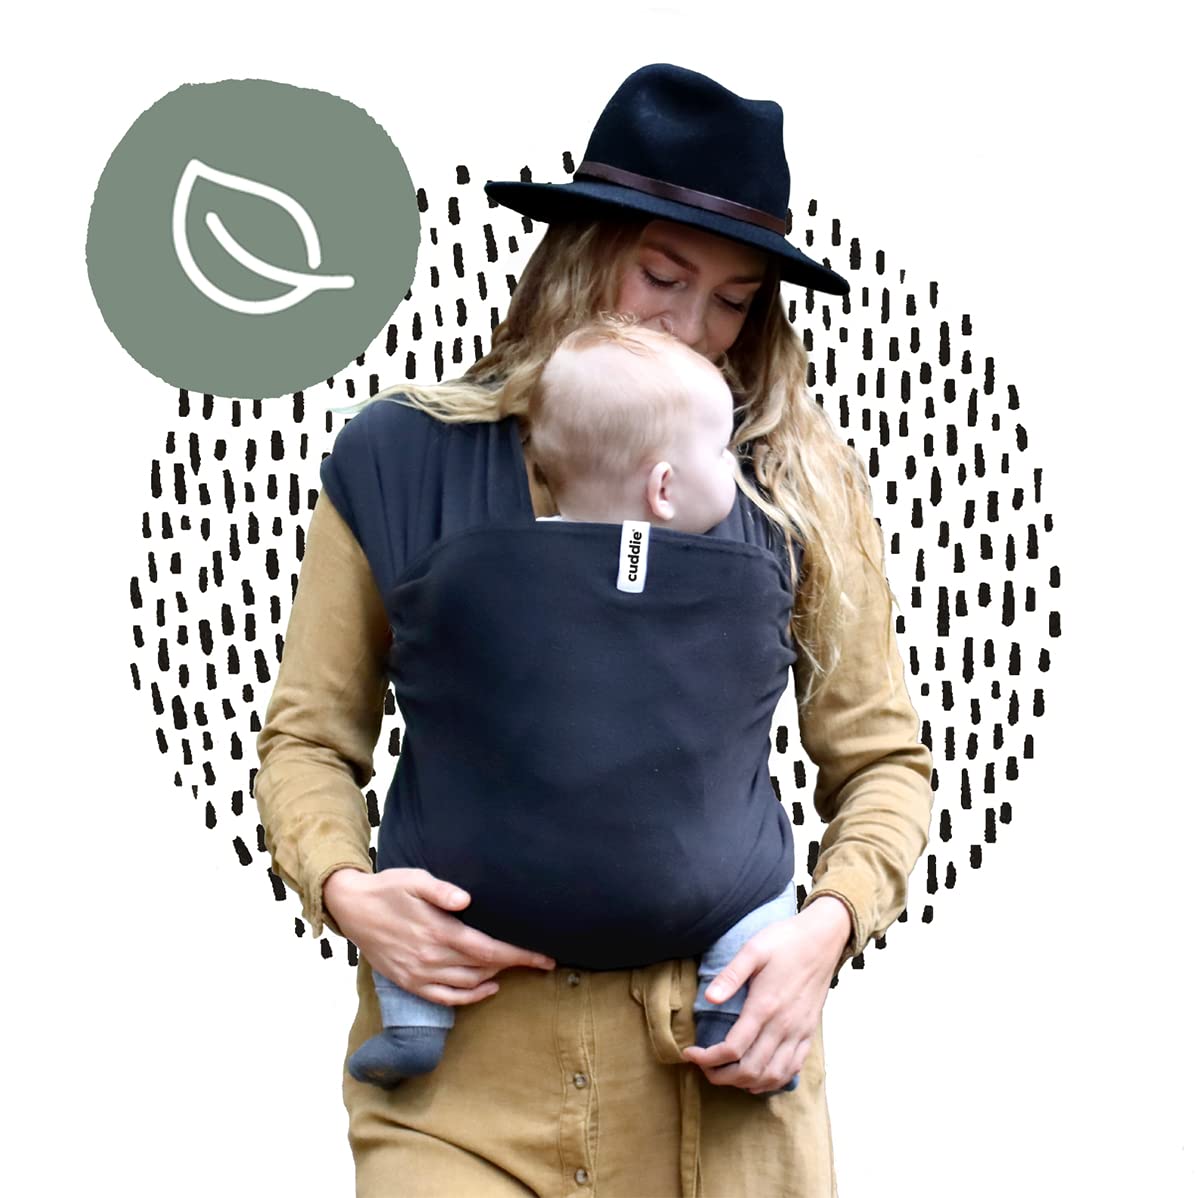 Cuddie Baby Wrap Carrier | Premium Sling for Newborns and Children | All in One Baby Sling | Carrier Sling for Newborns | Adjustable for All Body Types (Sand)